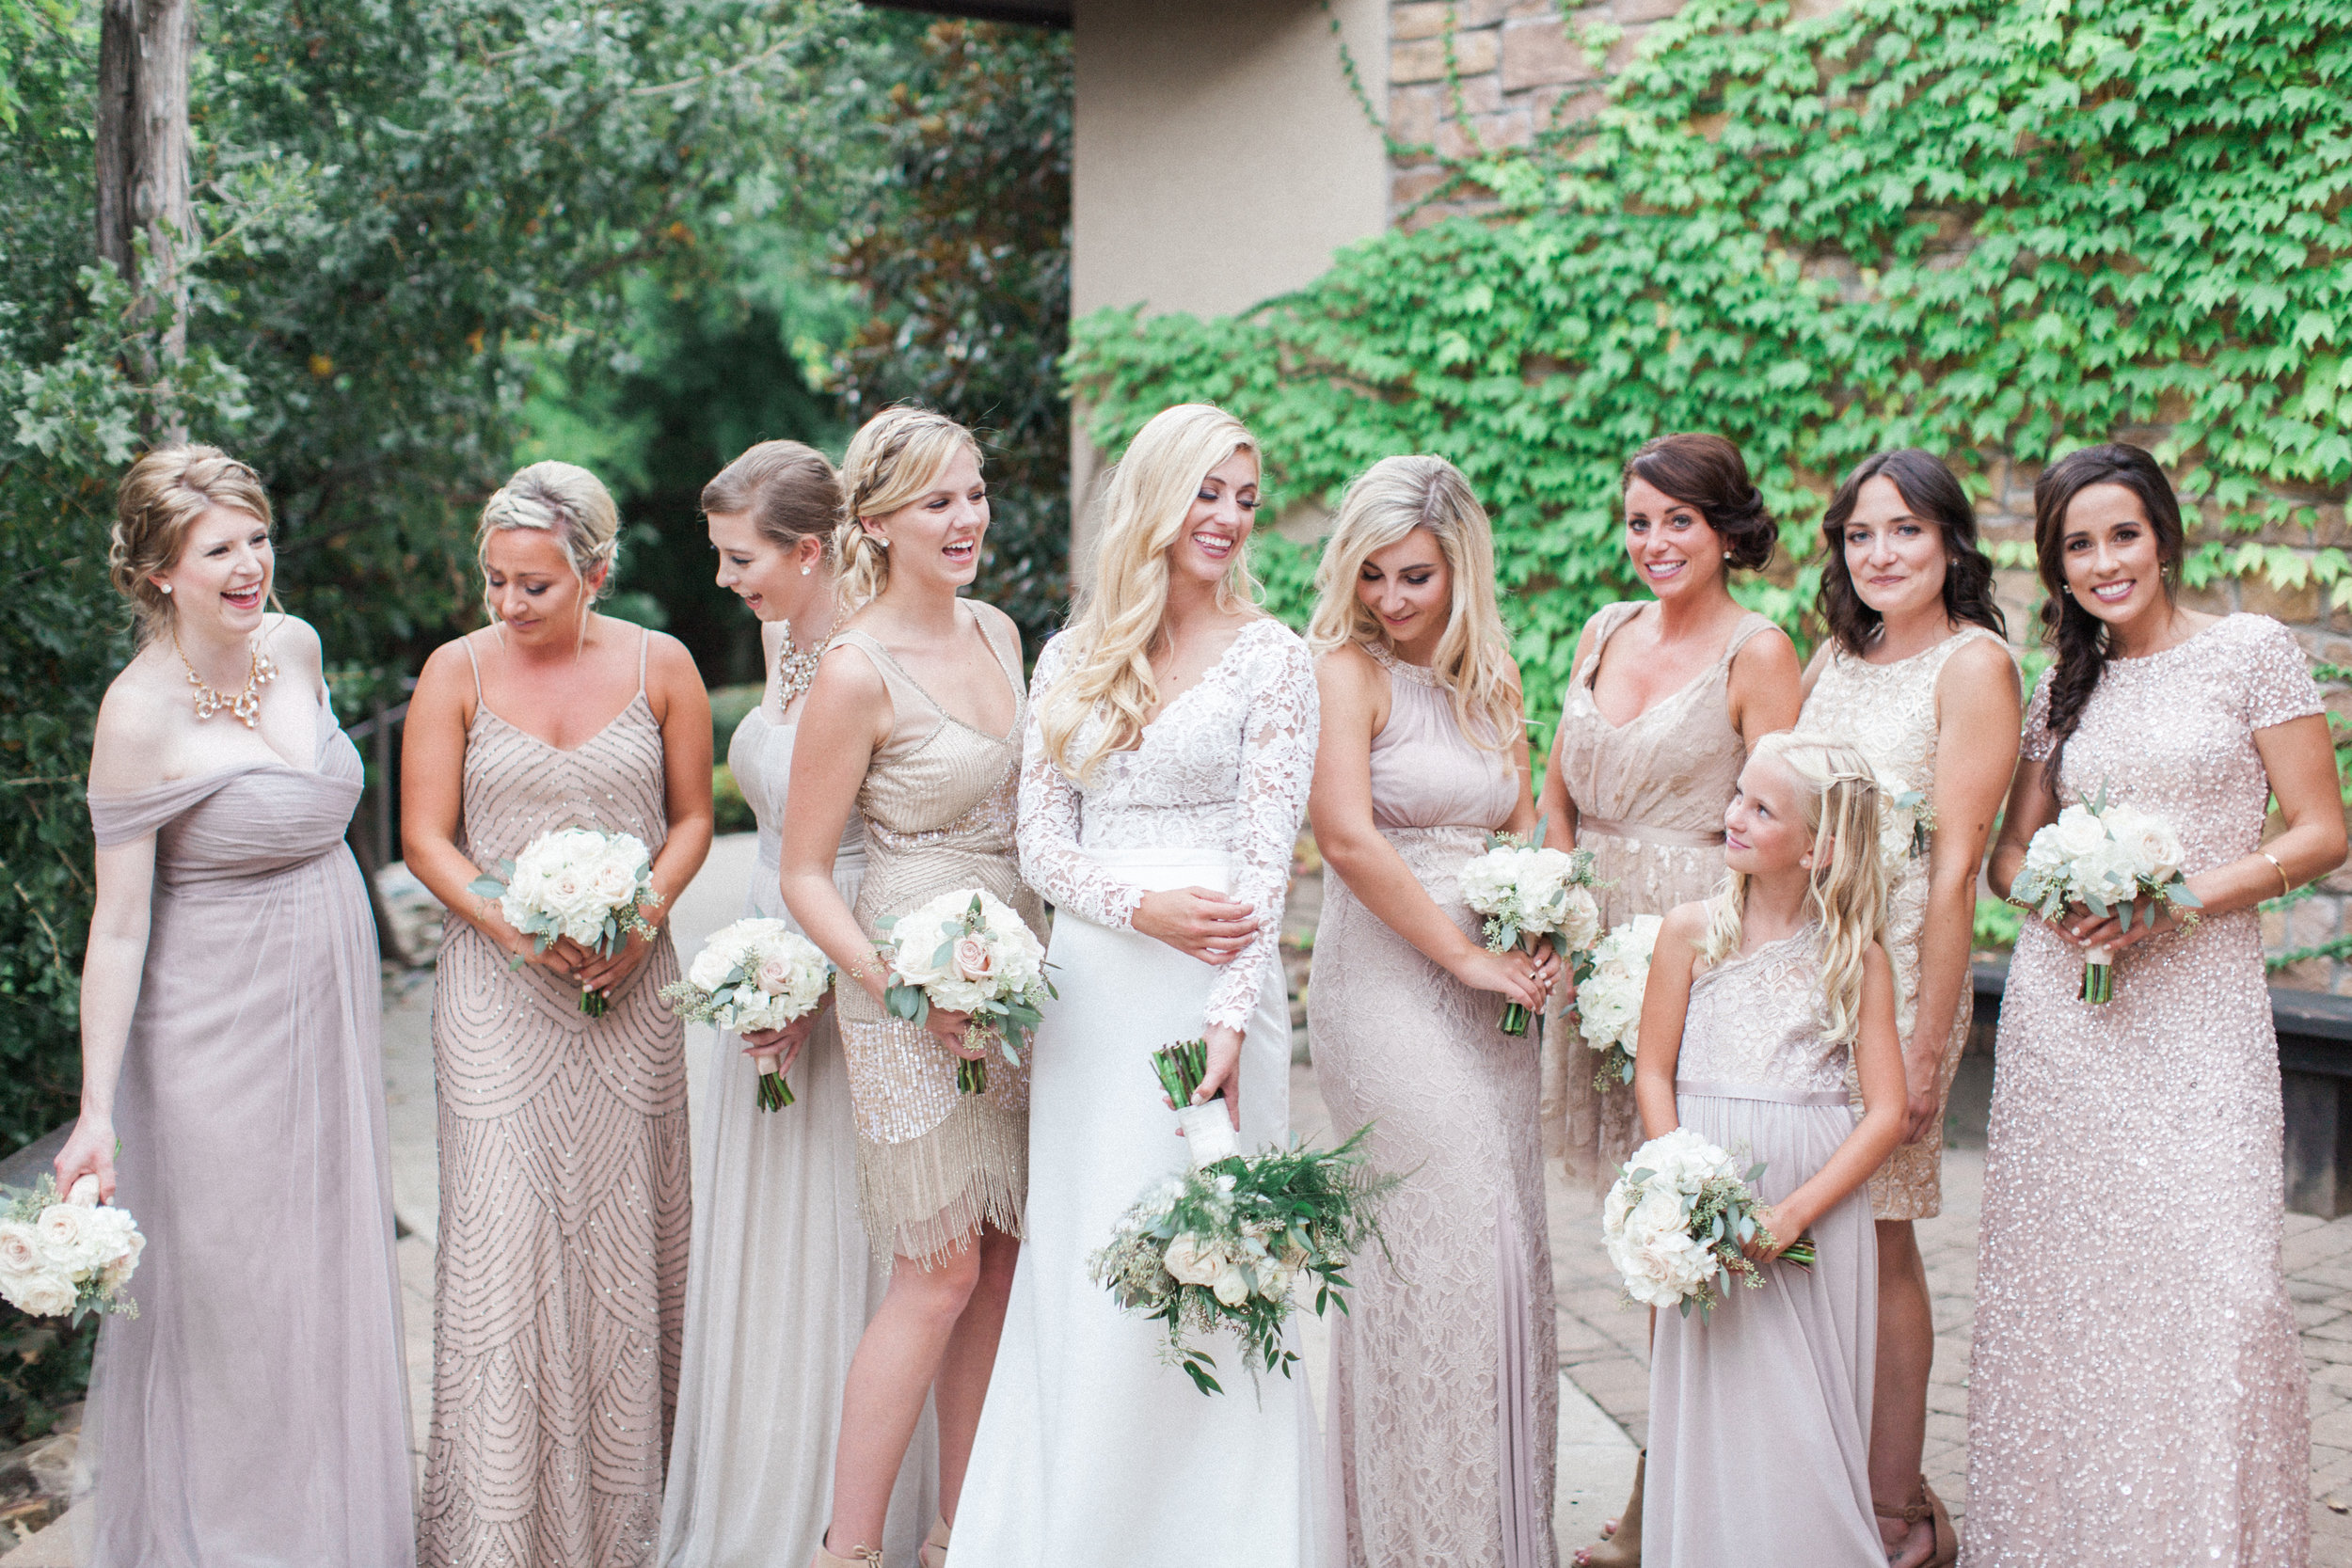 Organic, Greenery Wedding at Aristide with Jessica D'Onforio Photography